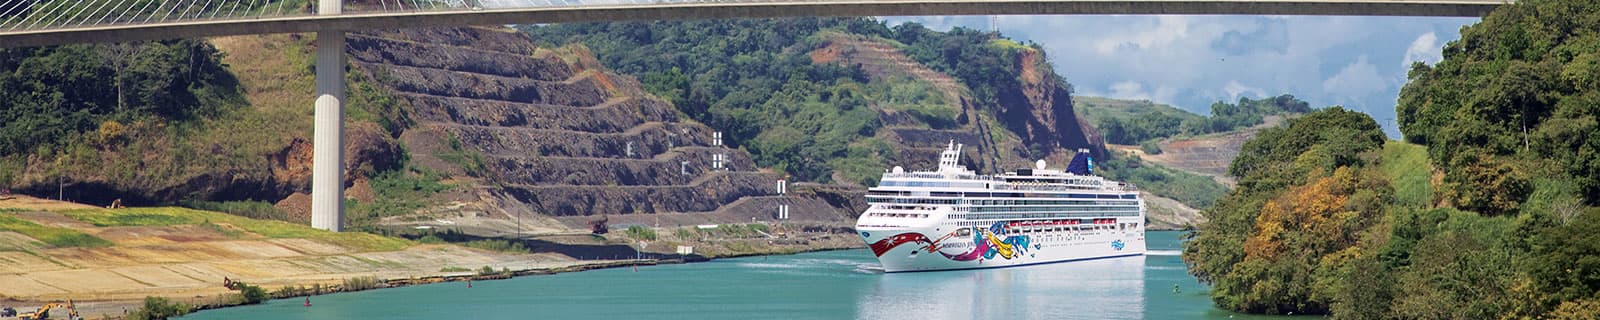 panama canal cruise in december